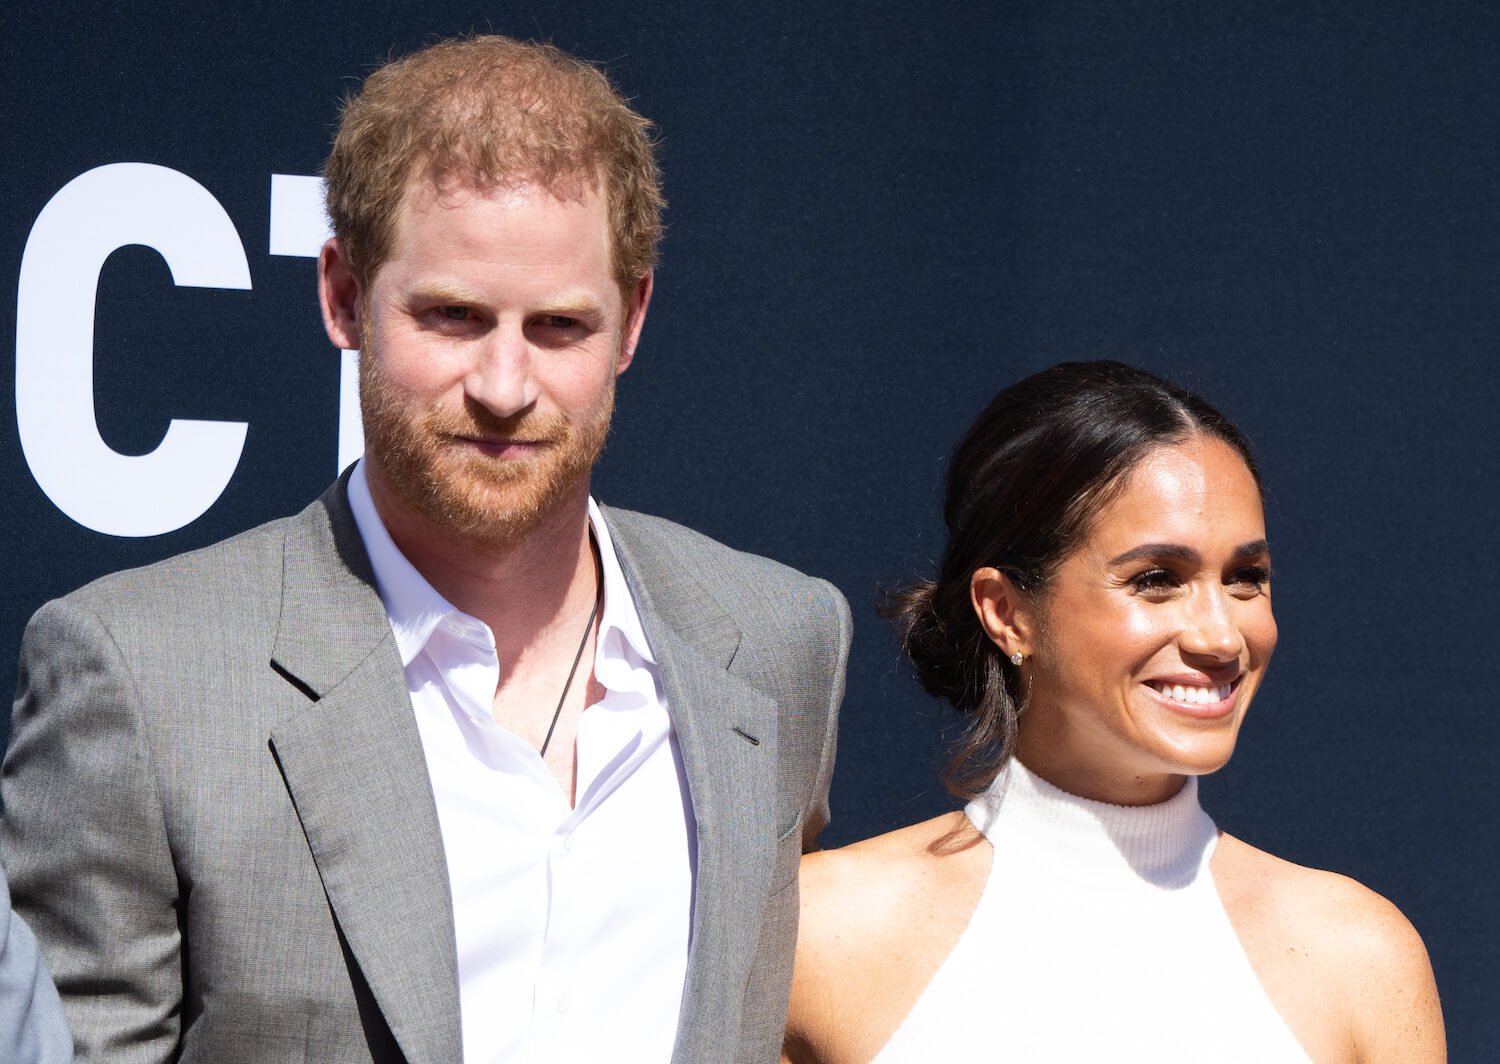 Prince Harry wears a jacket and white shirt and smirks while standing next to Meghan Markle, who is smiling while wearing a white top